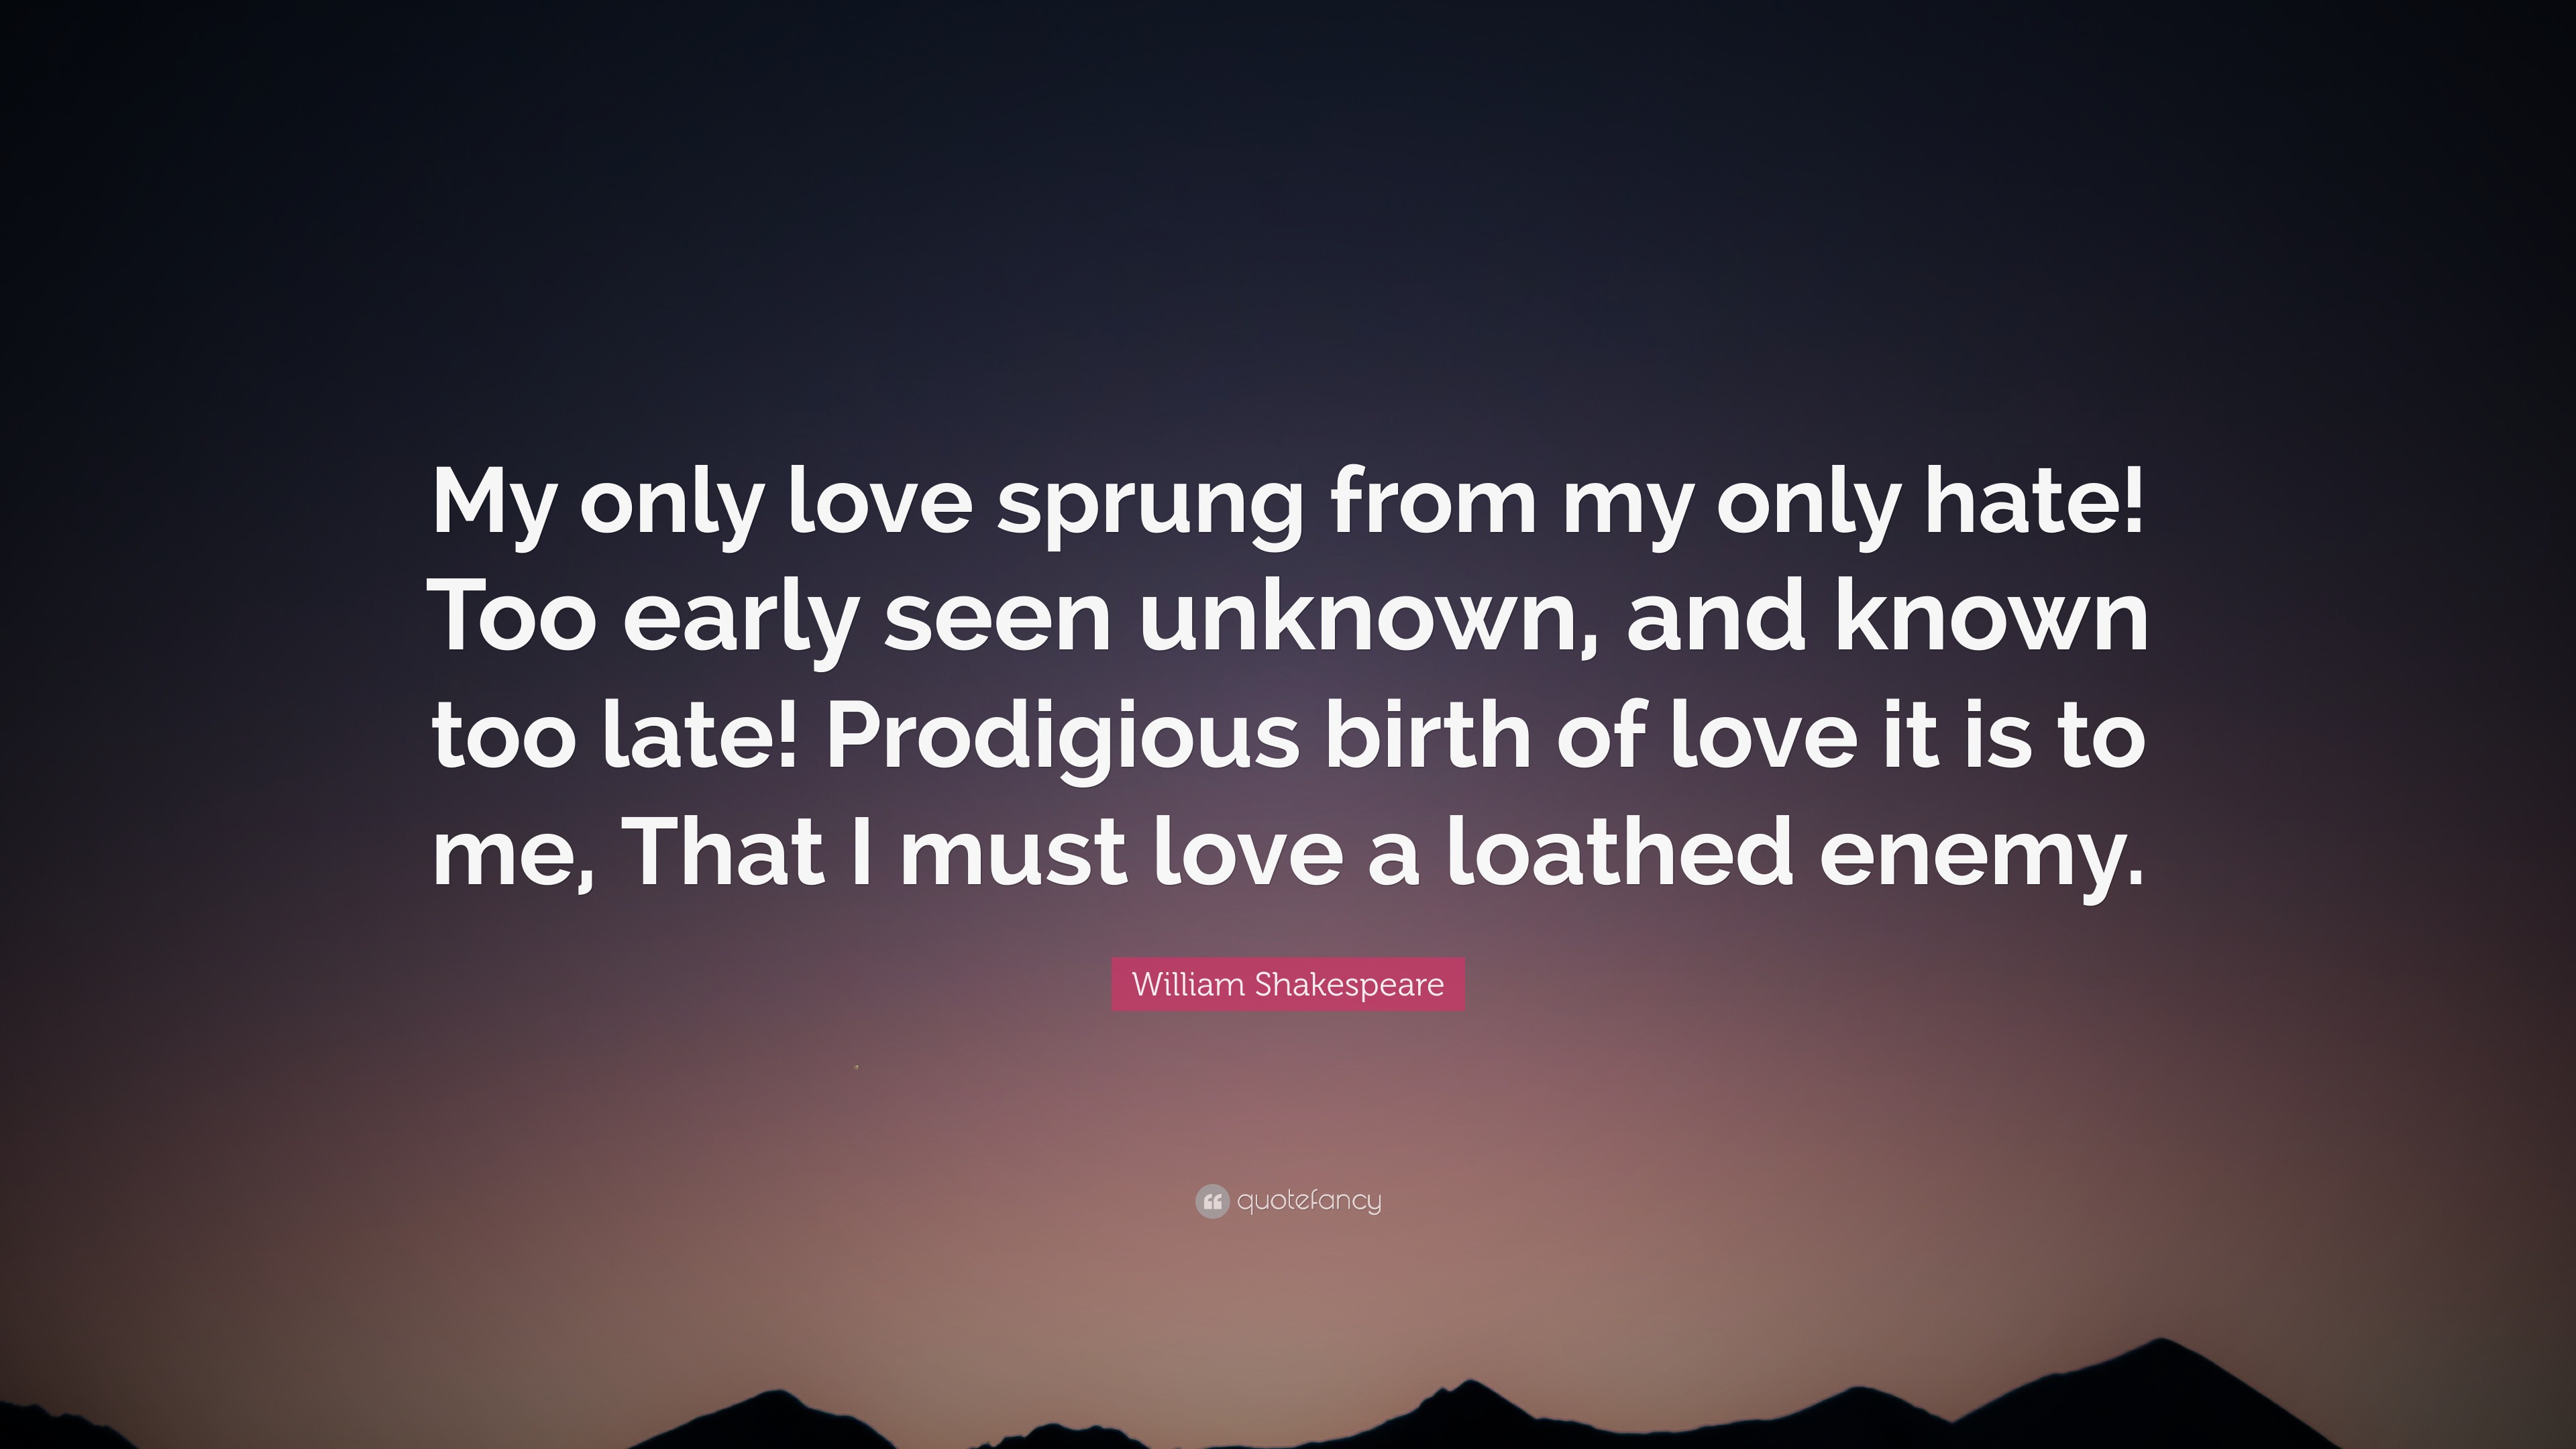 William Shakespeare Quote “My only love sprung from my only hate Too early